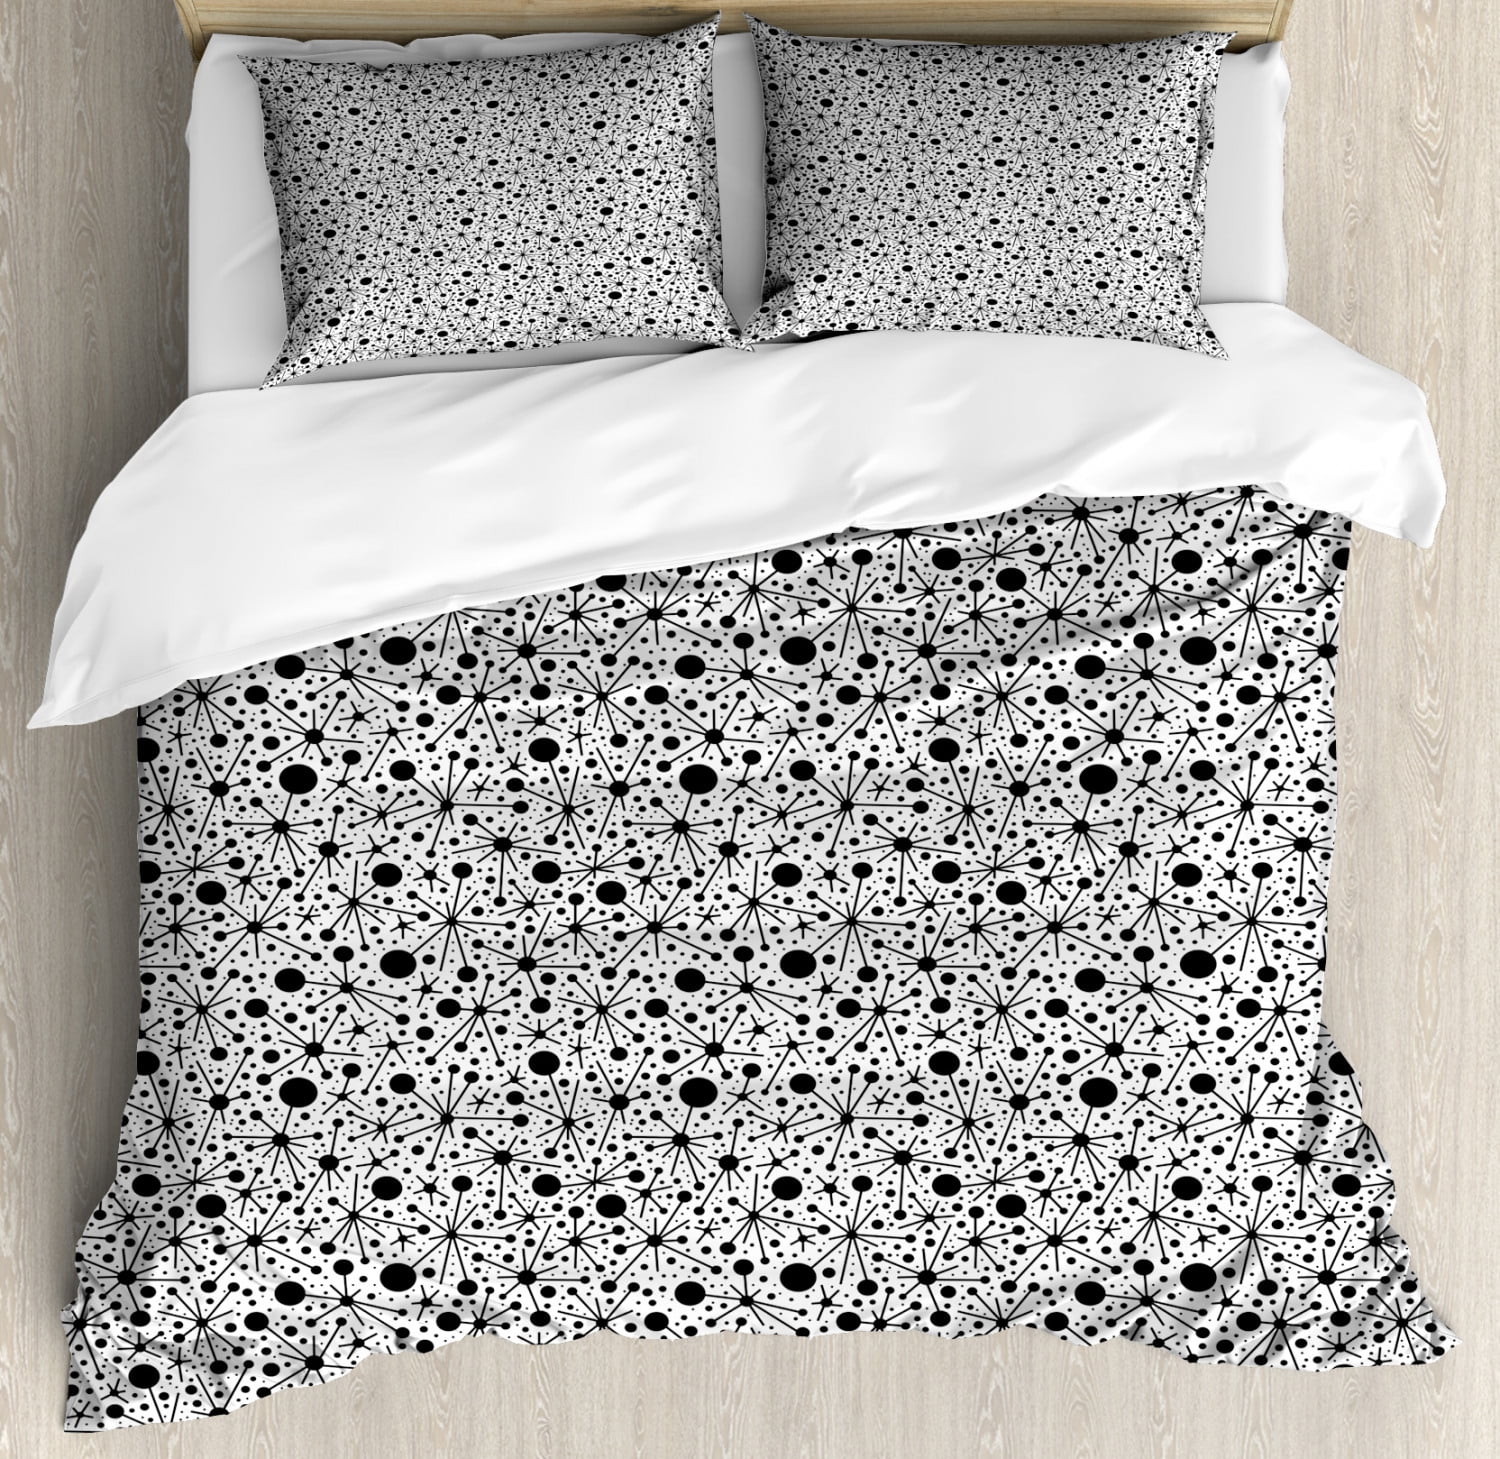 Piece Bedding Set With 2 Pillow Shams, Simple Duvet Cover Pattern